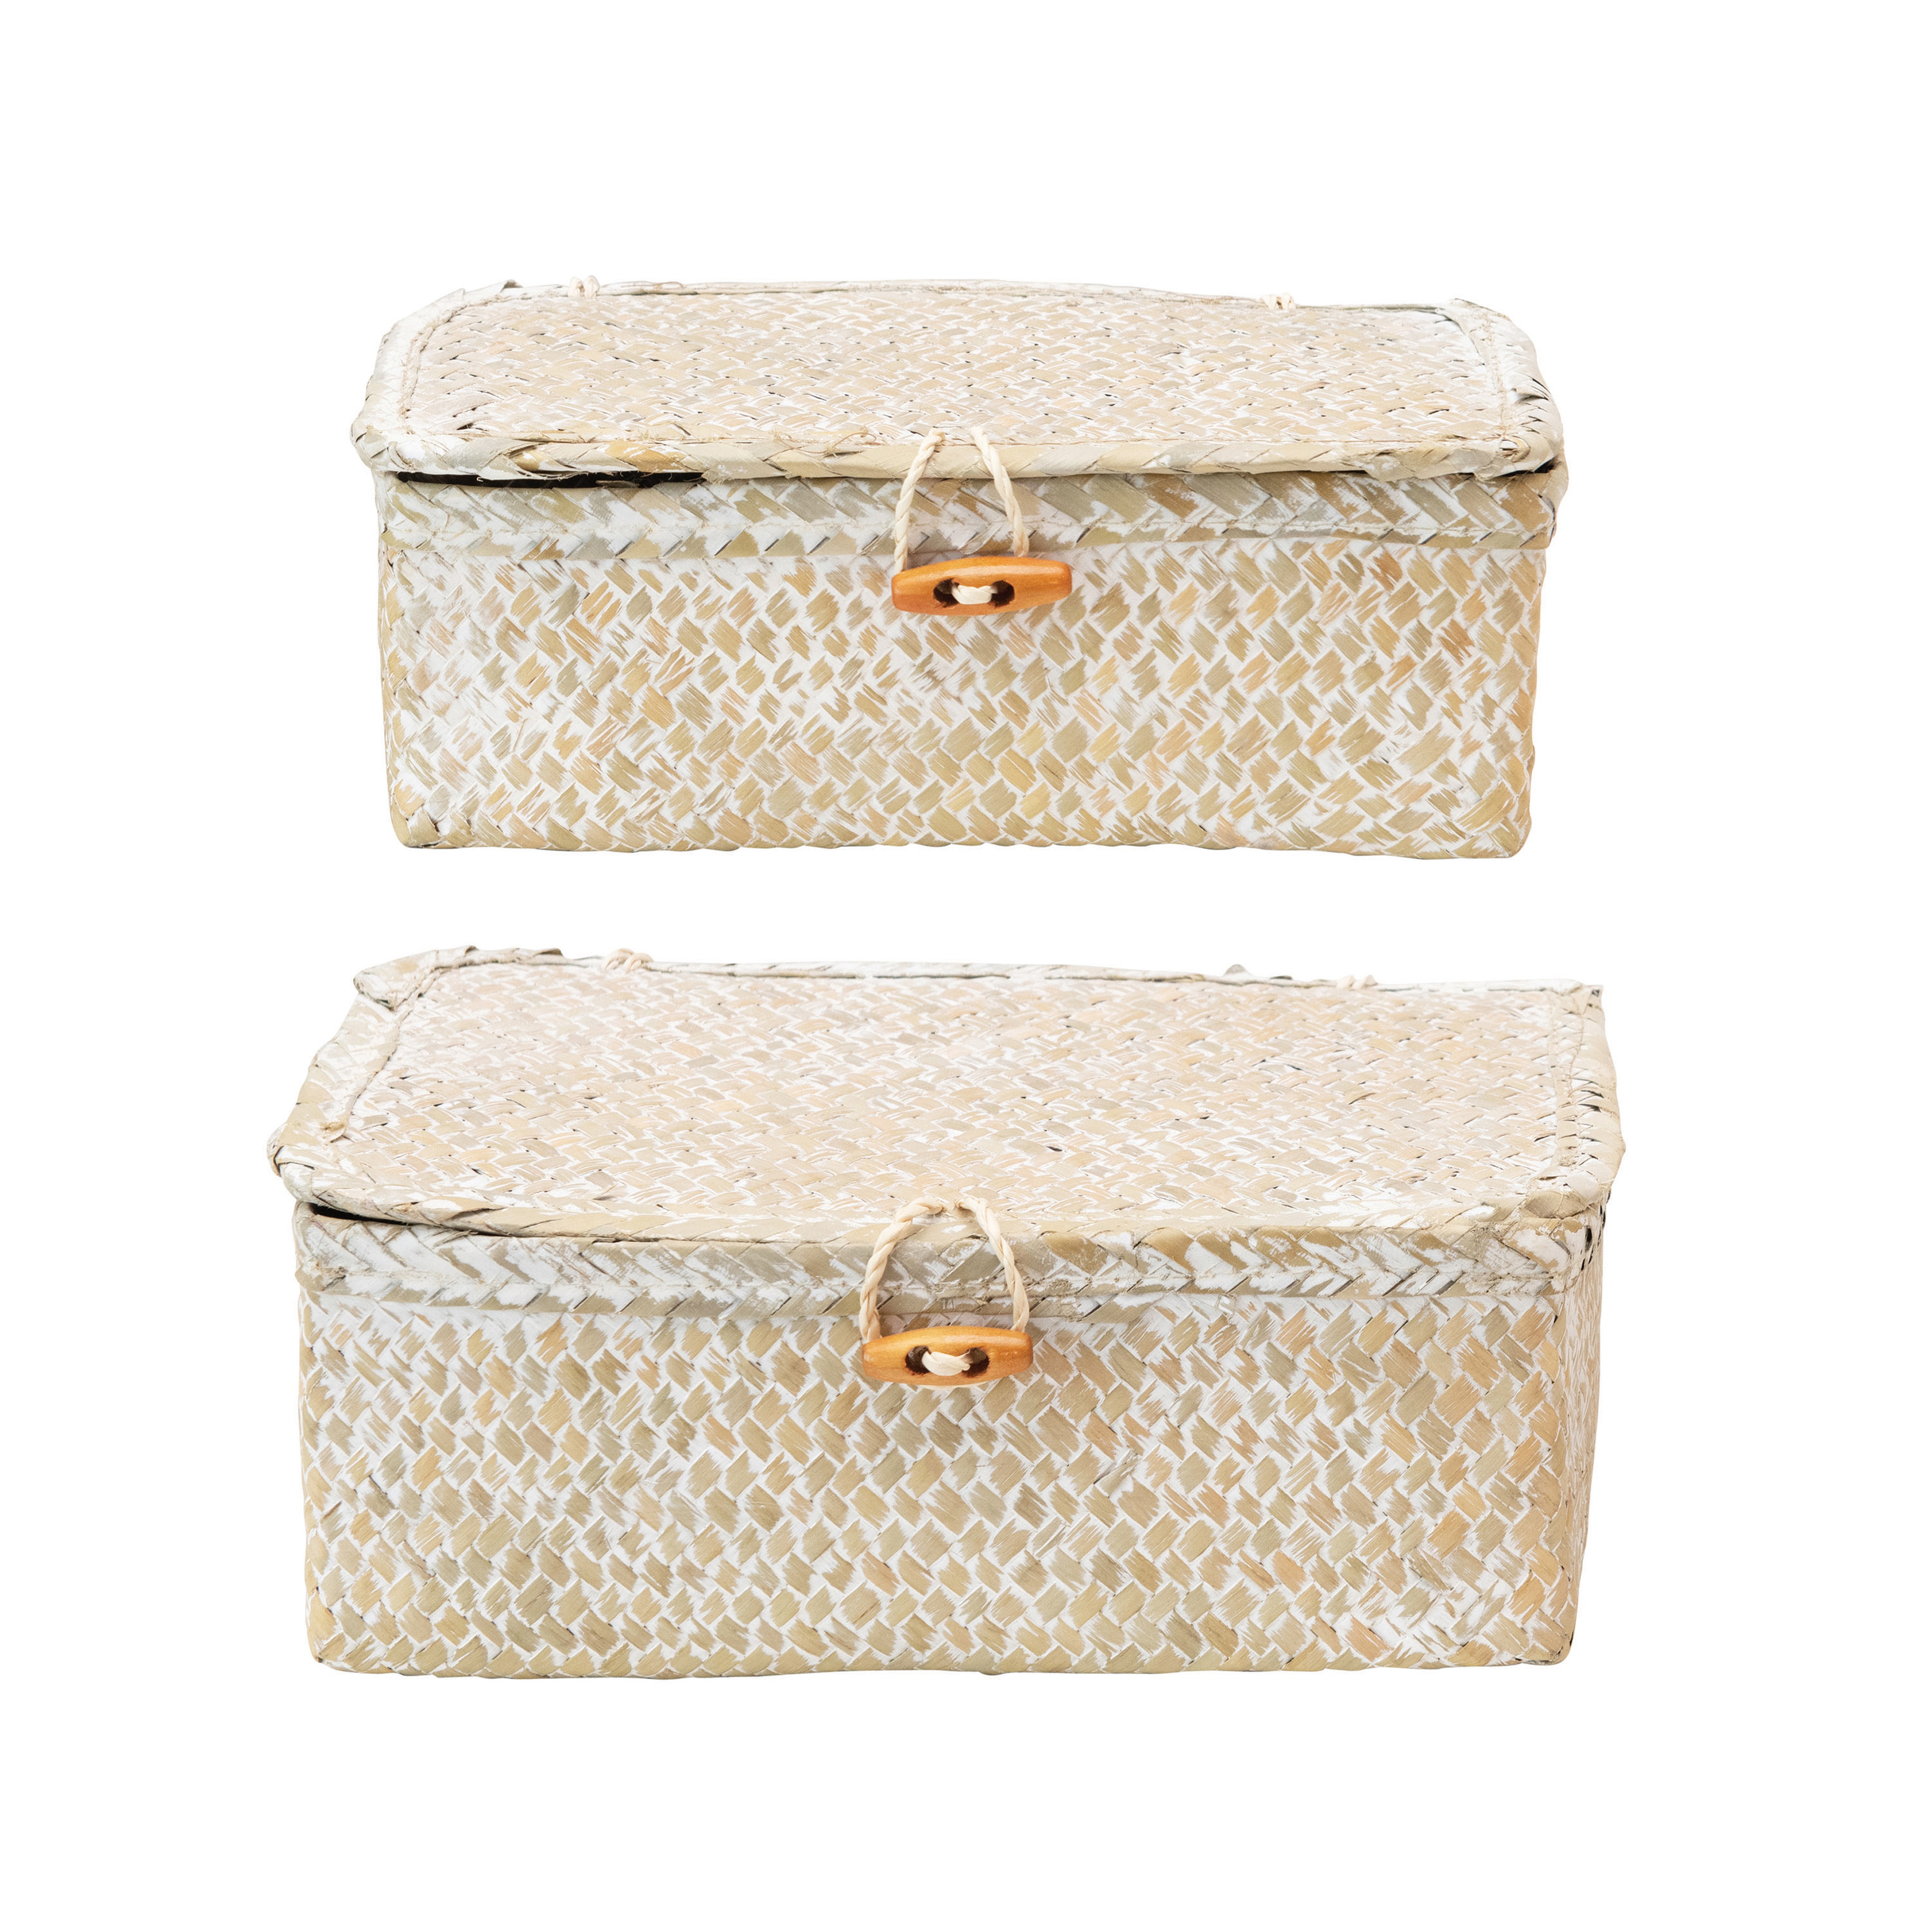 Hand-Woven Seagrass Boxes with Lids & Toggle Closure, Whitewashed, Set of 2 - Nomad Home